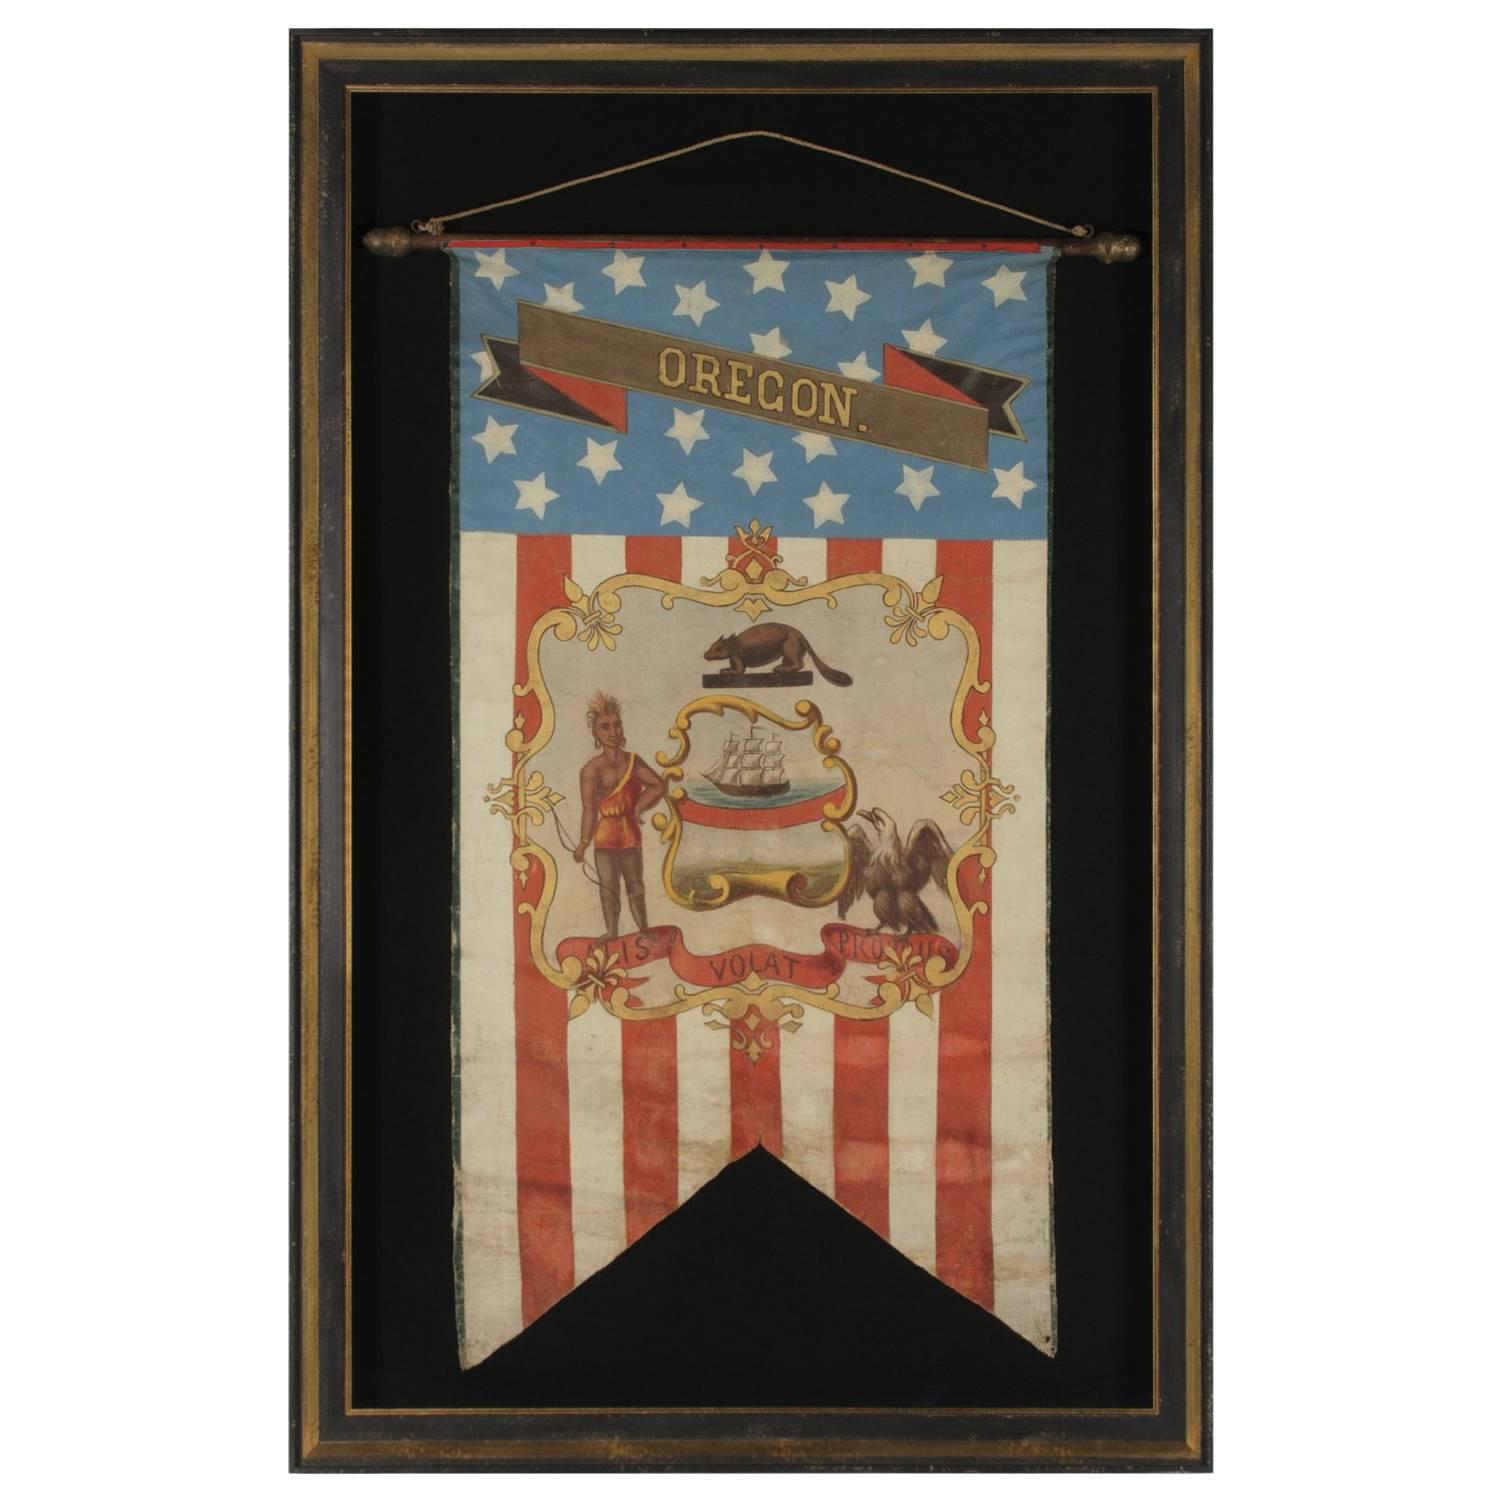 Hand-Painted Patriotic Banner with the Seal of the State of Oregon